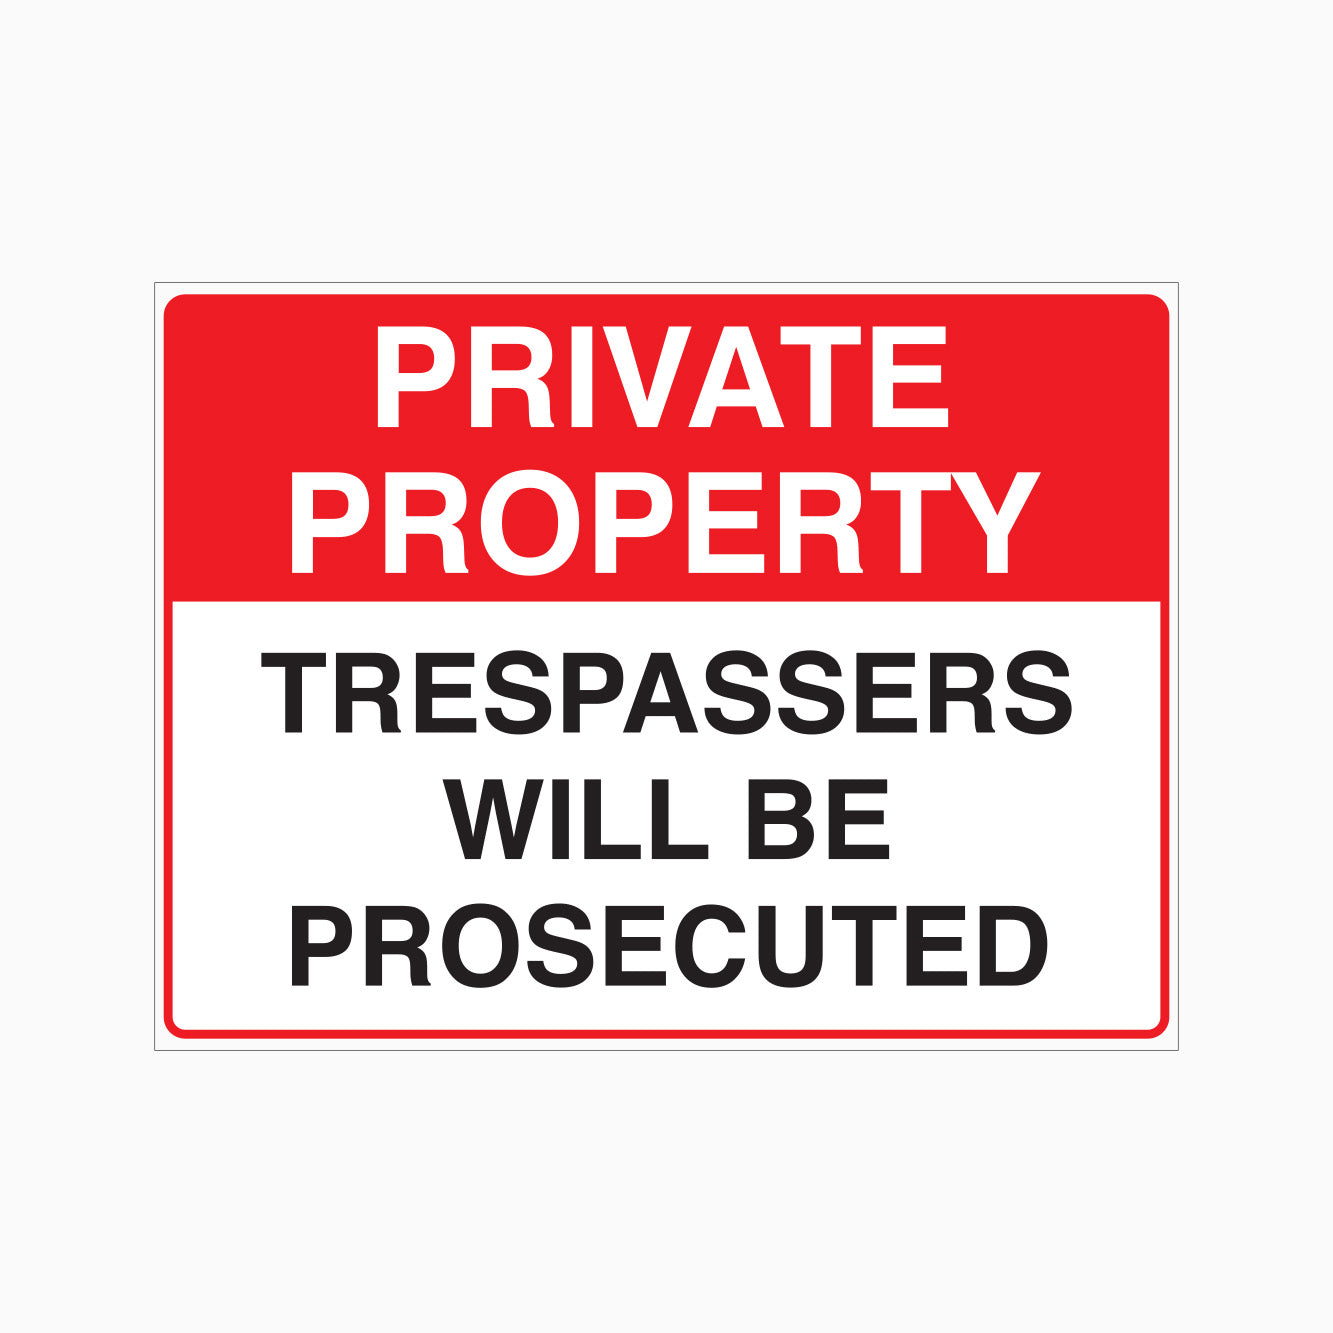 PRIVATE PROPERTY SIGN - TRESPASSERS WILL BE PROSECUTED SIGN